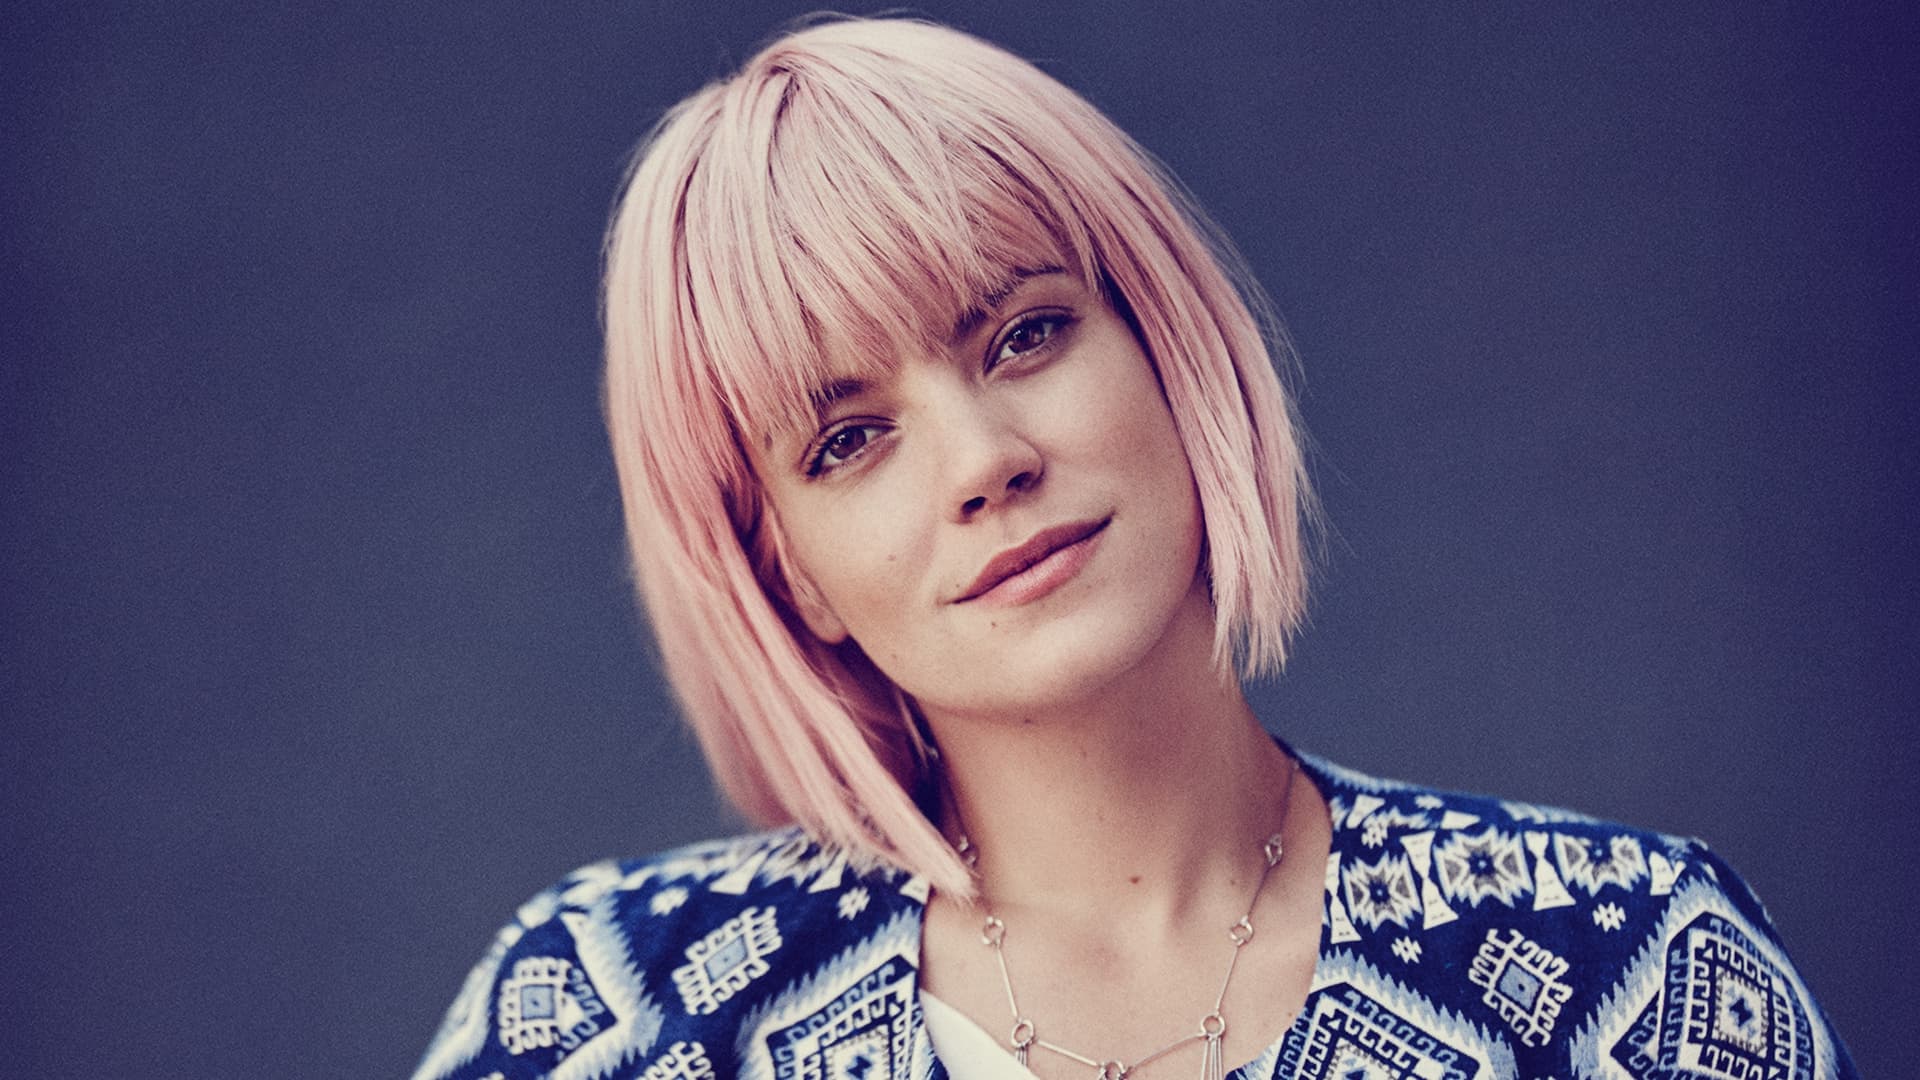 Lily Allen wallpaper HD High Quality Resolution Download